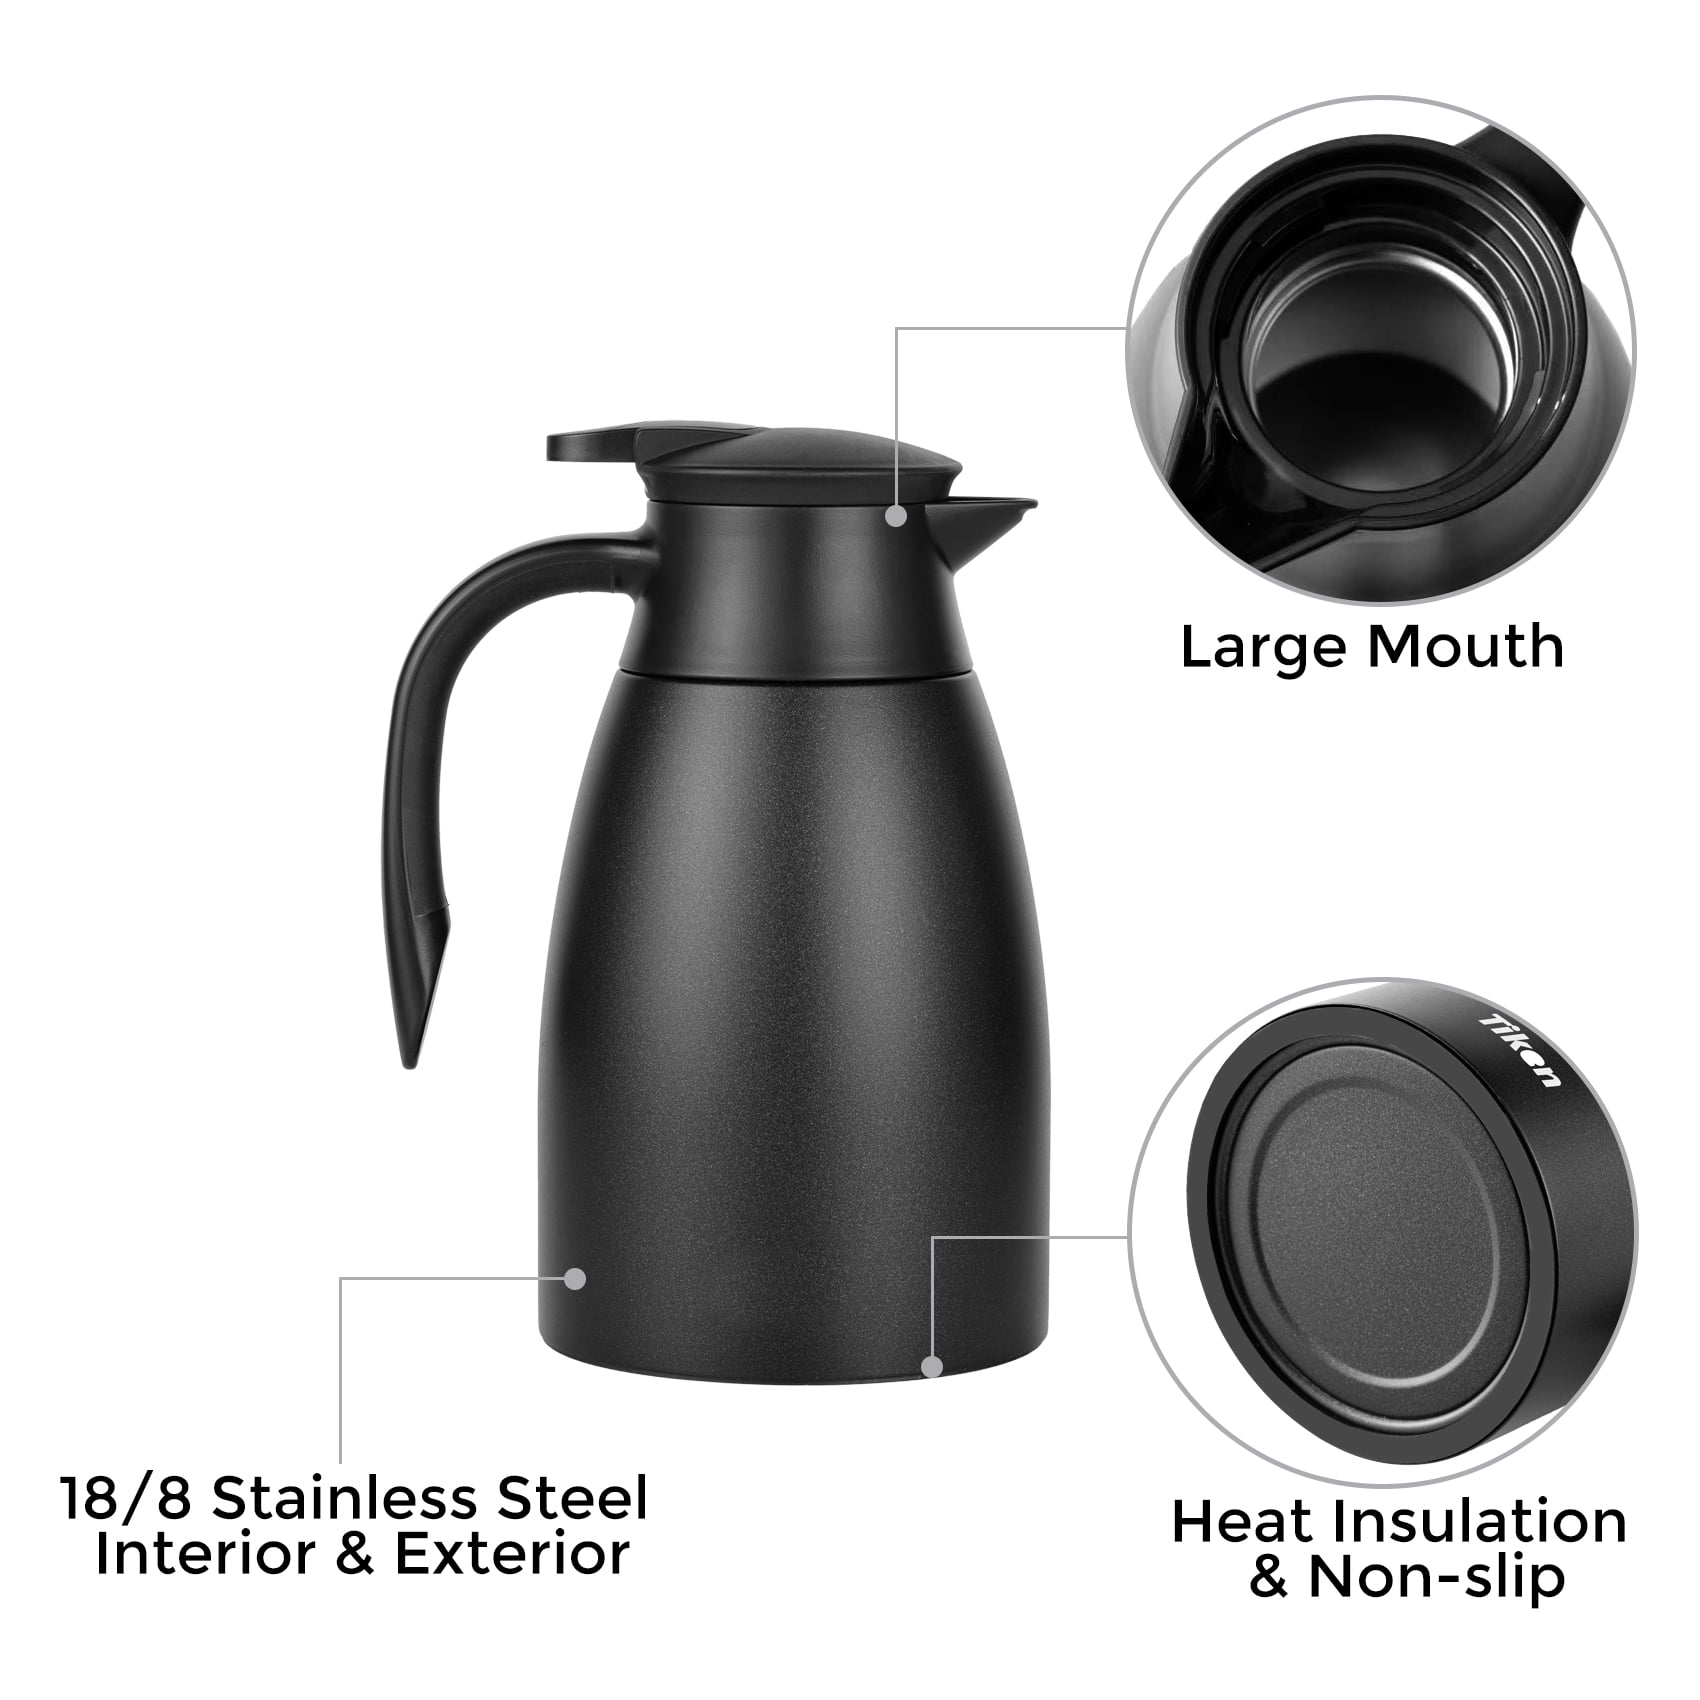 Coffmax 68 Oz/2 Liter Insulated Thermal Coffee Carafe Pitcher - Stainless Steel Double Walled Vacuum Thermos Server Pot â